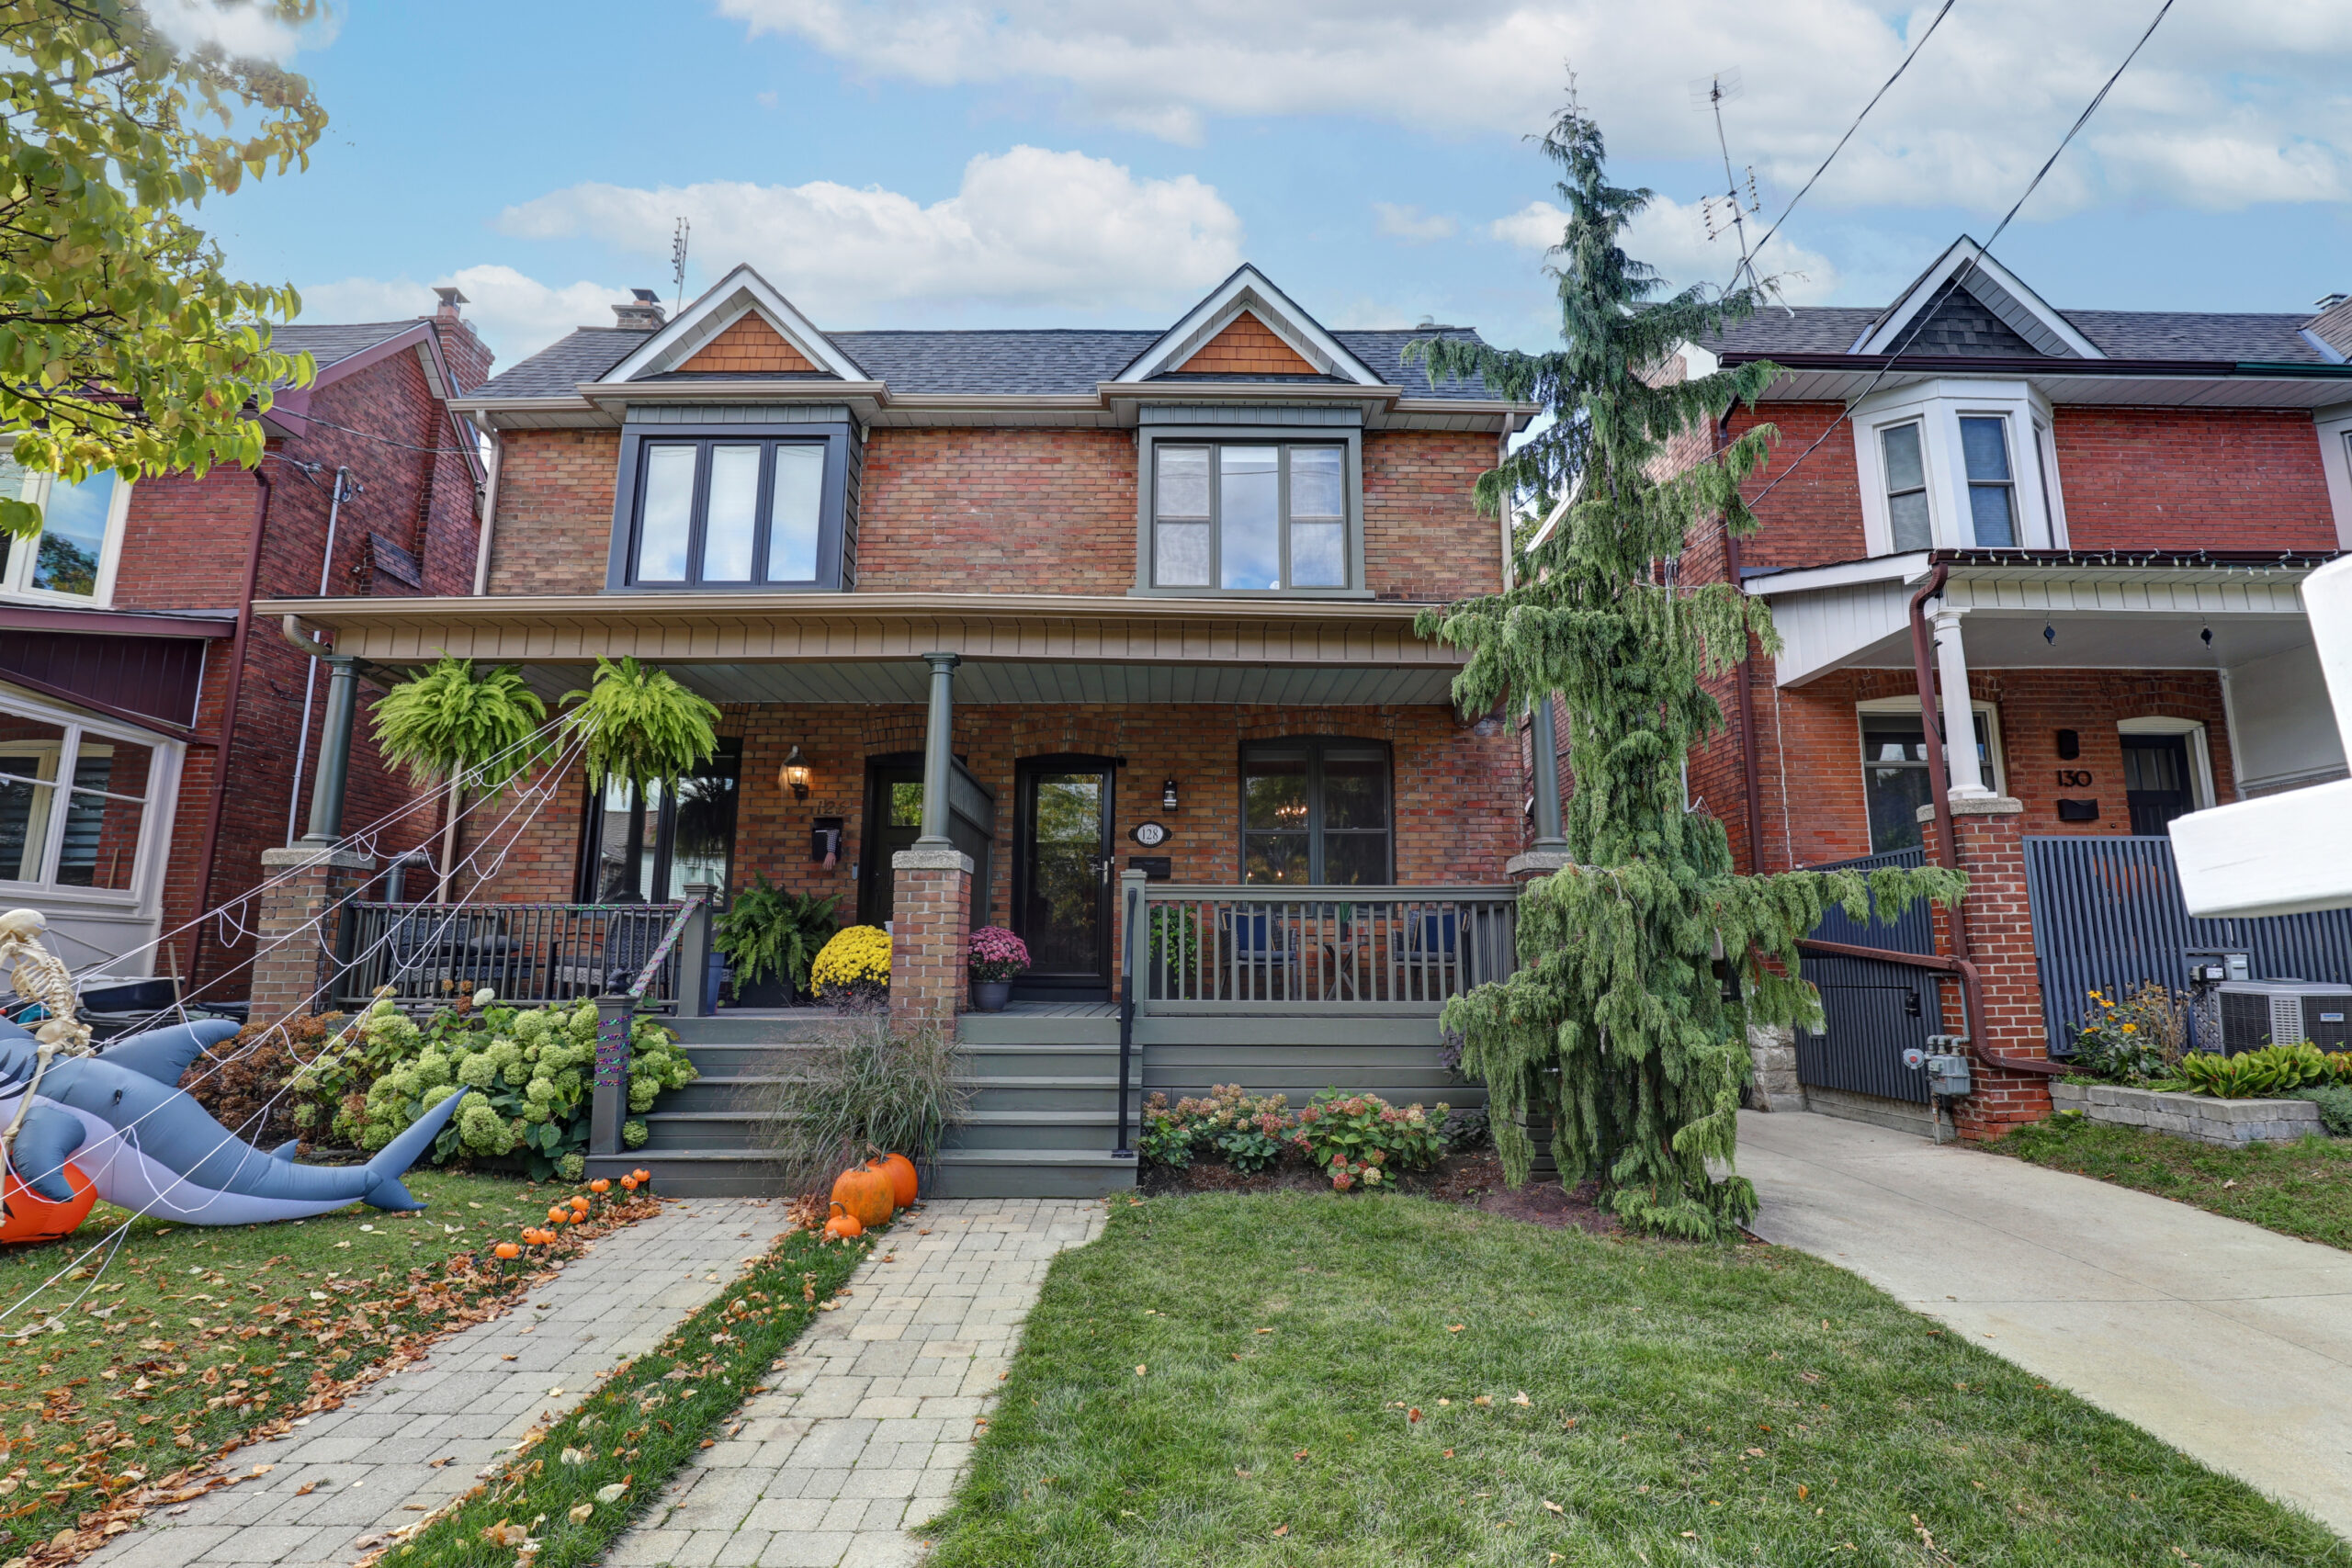 Sold- Semi-Detached Home on Evans Ave in Toronto